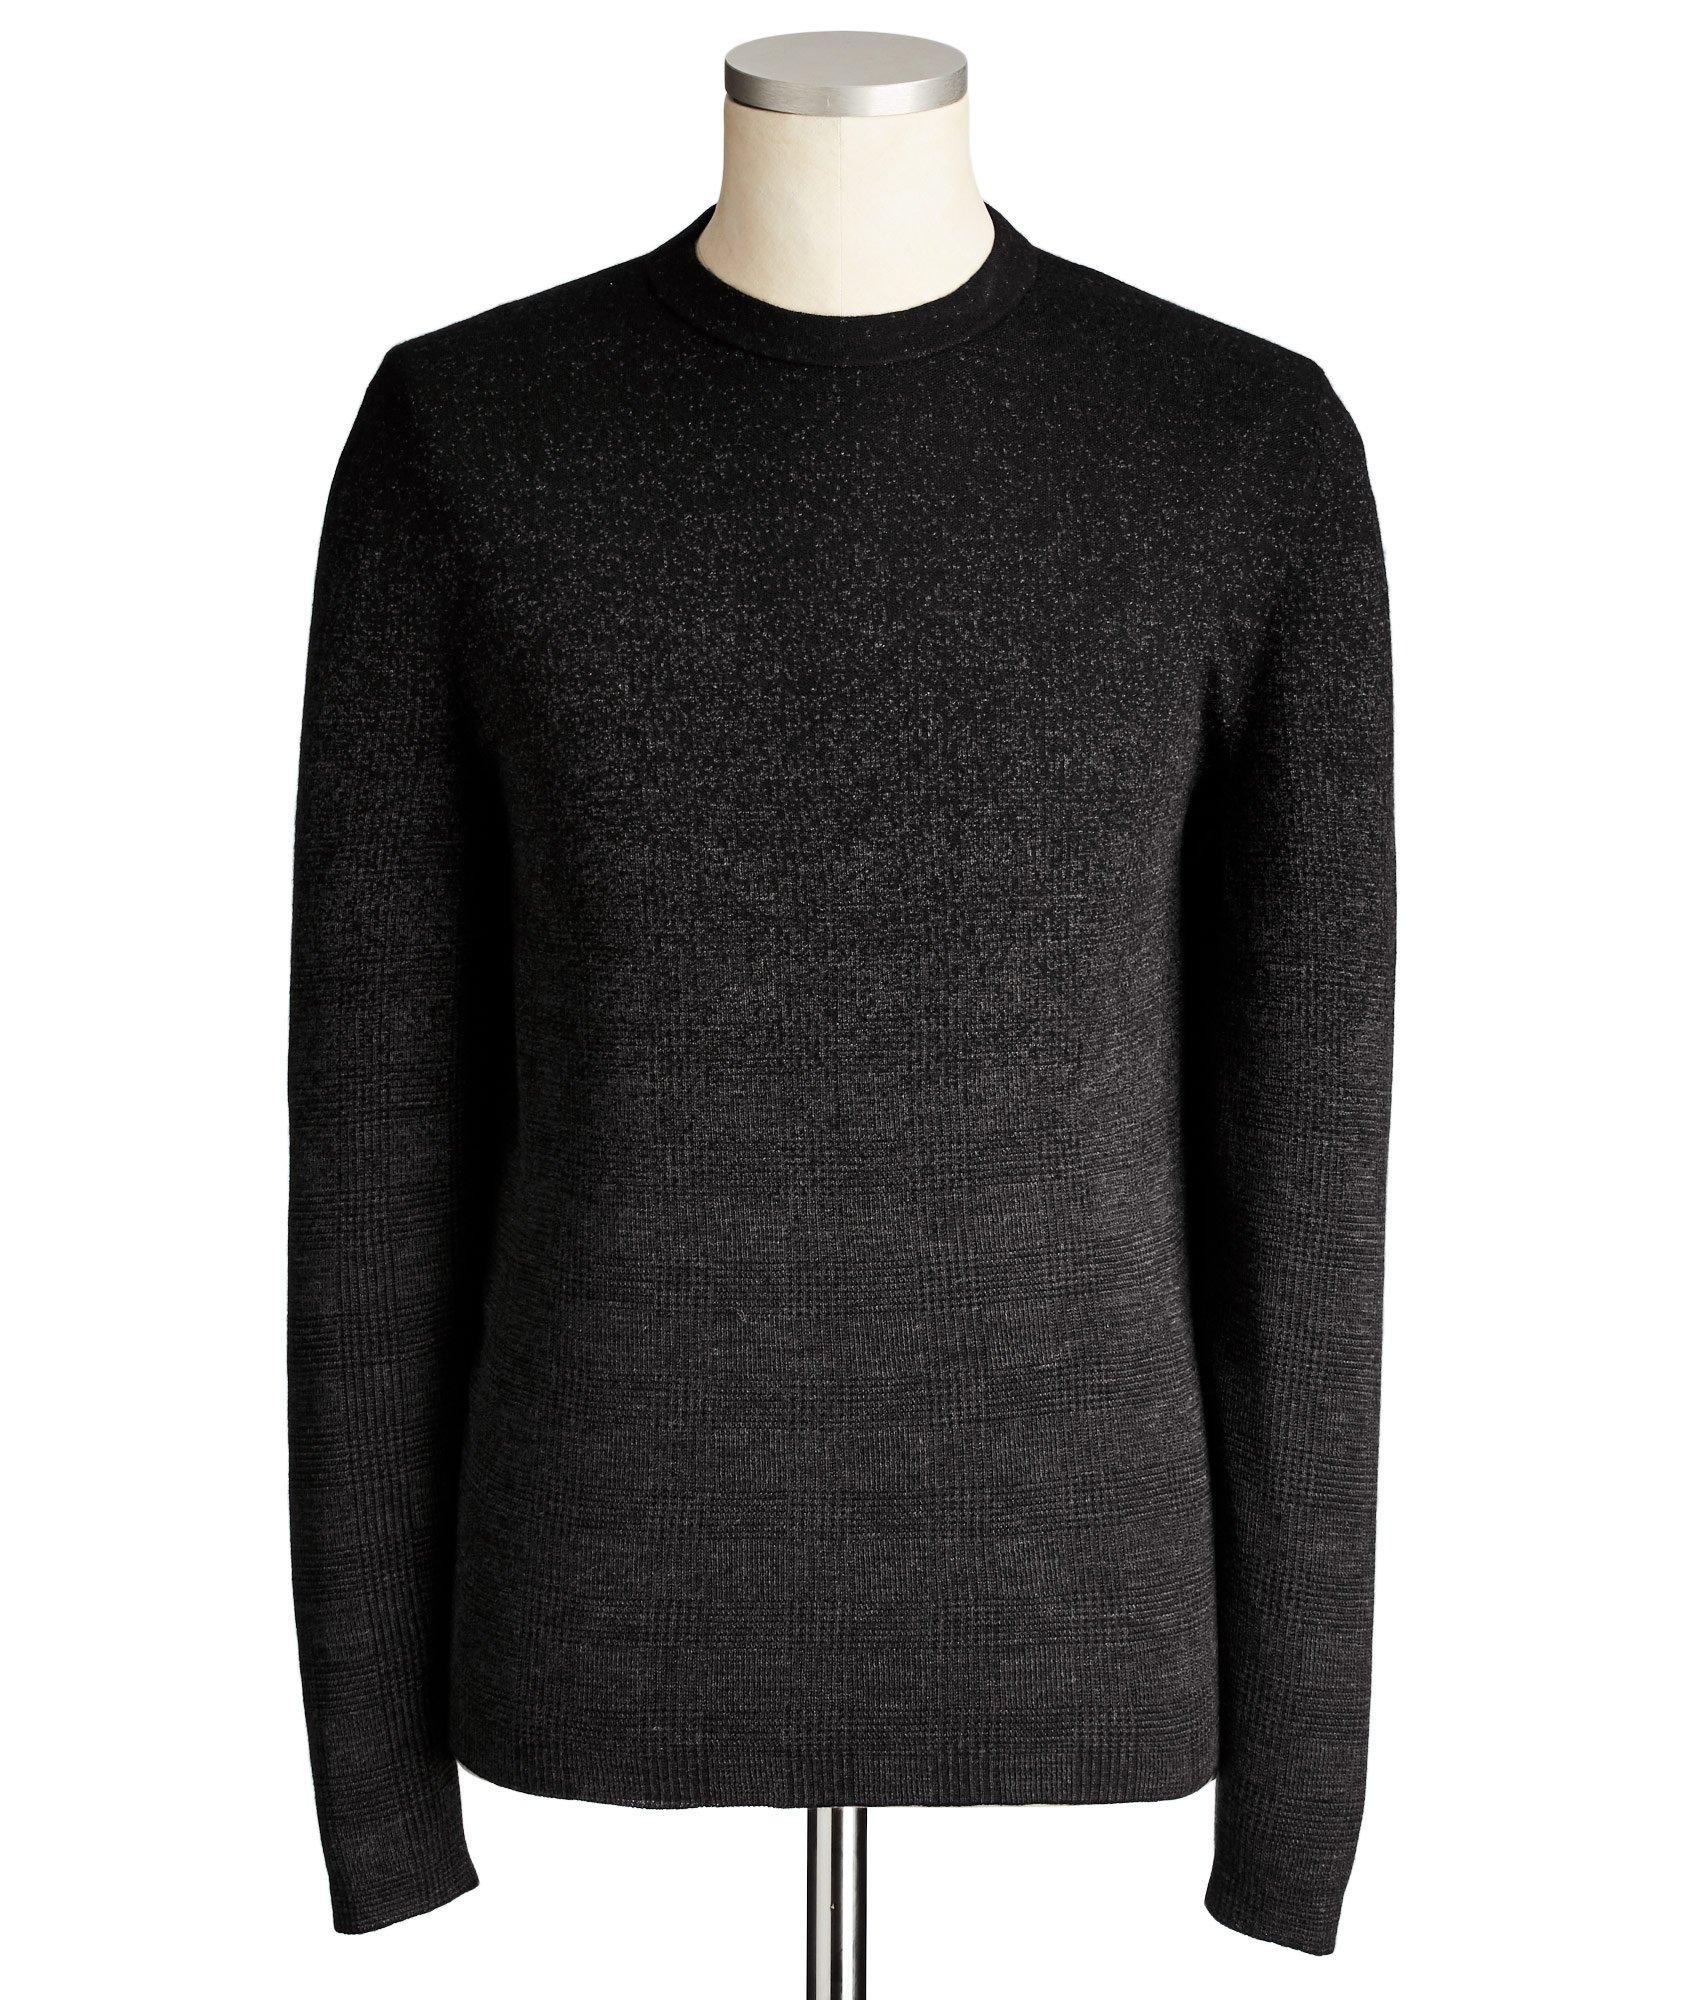 Cashmere Blend Sweater image 0